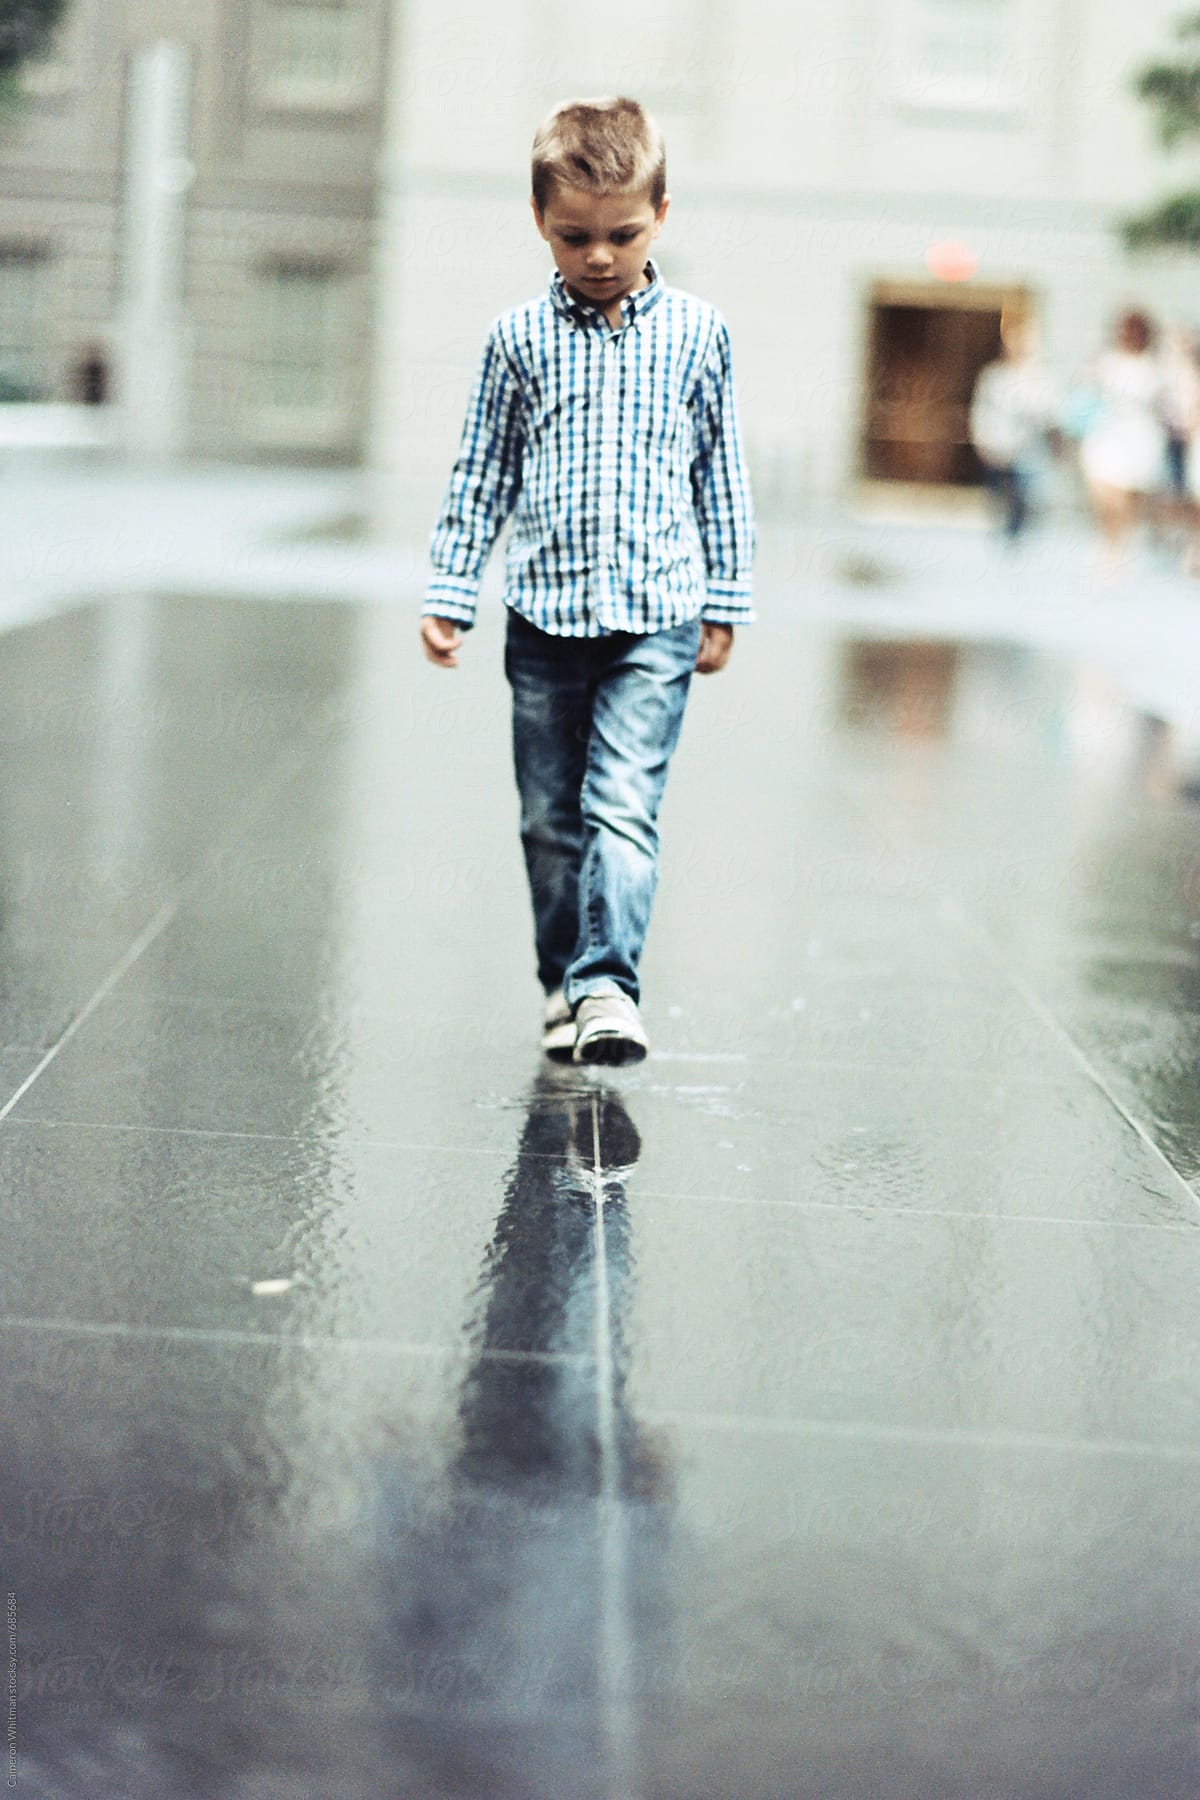 Boy Walking In A Straight Line On Wet Pavement By Stocksy Contributor